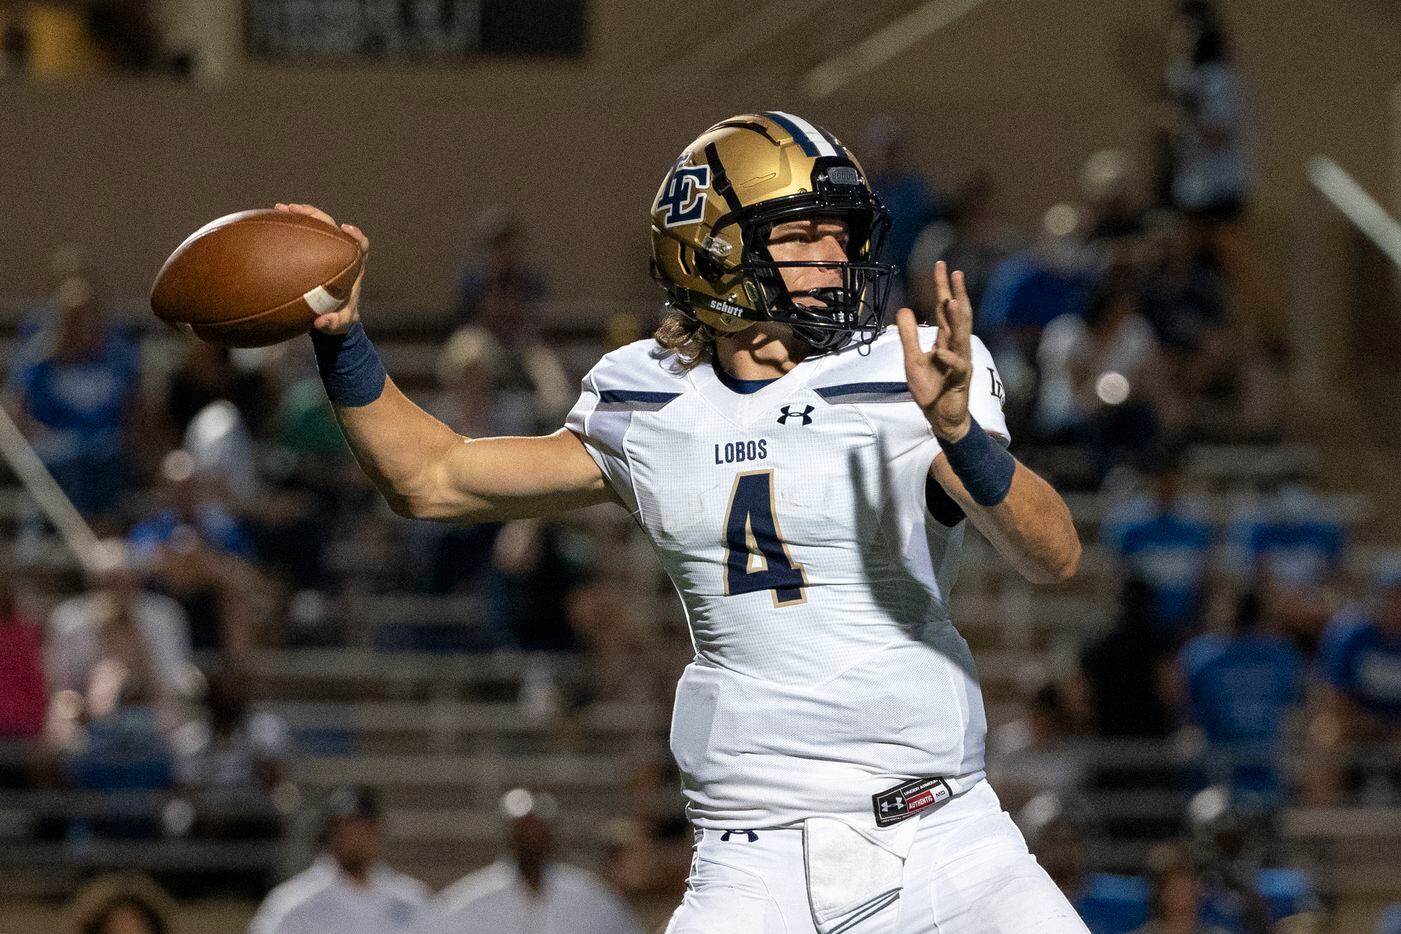 Little Elm senior quarterback John Mateer (4) throws a pass during the first half of a high school football game against Plano West on Friday, Sept. 10, 2021 at John Clark Stadium in Plano, Texas. (Jeffrey McWhorter/Special Contributor)